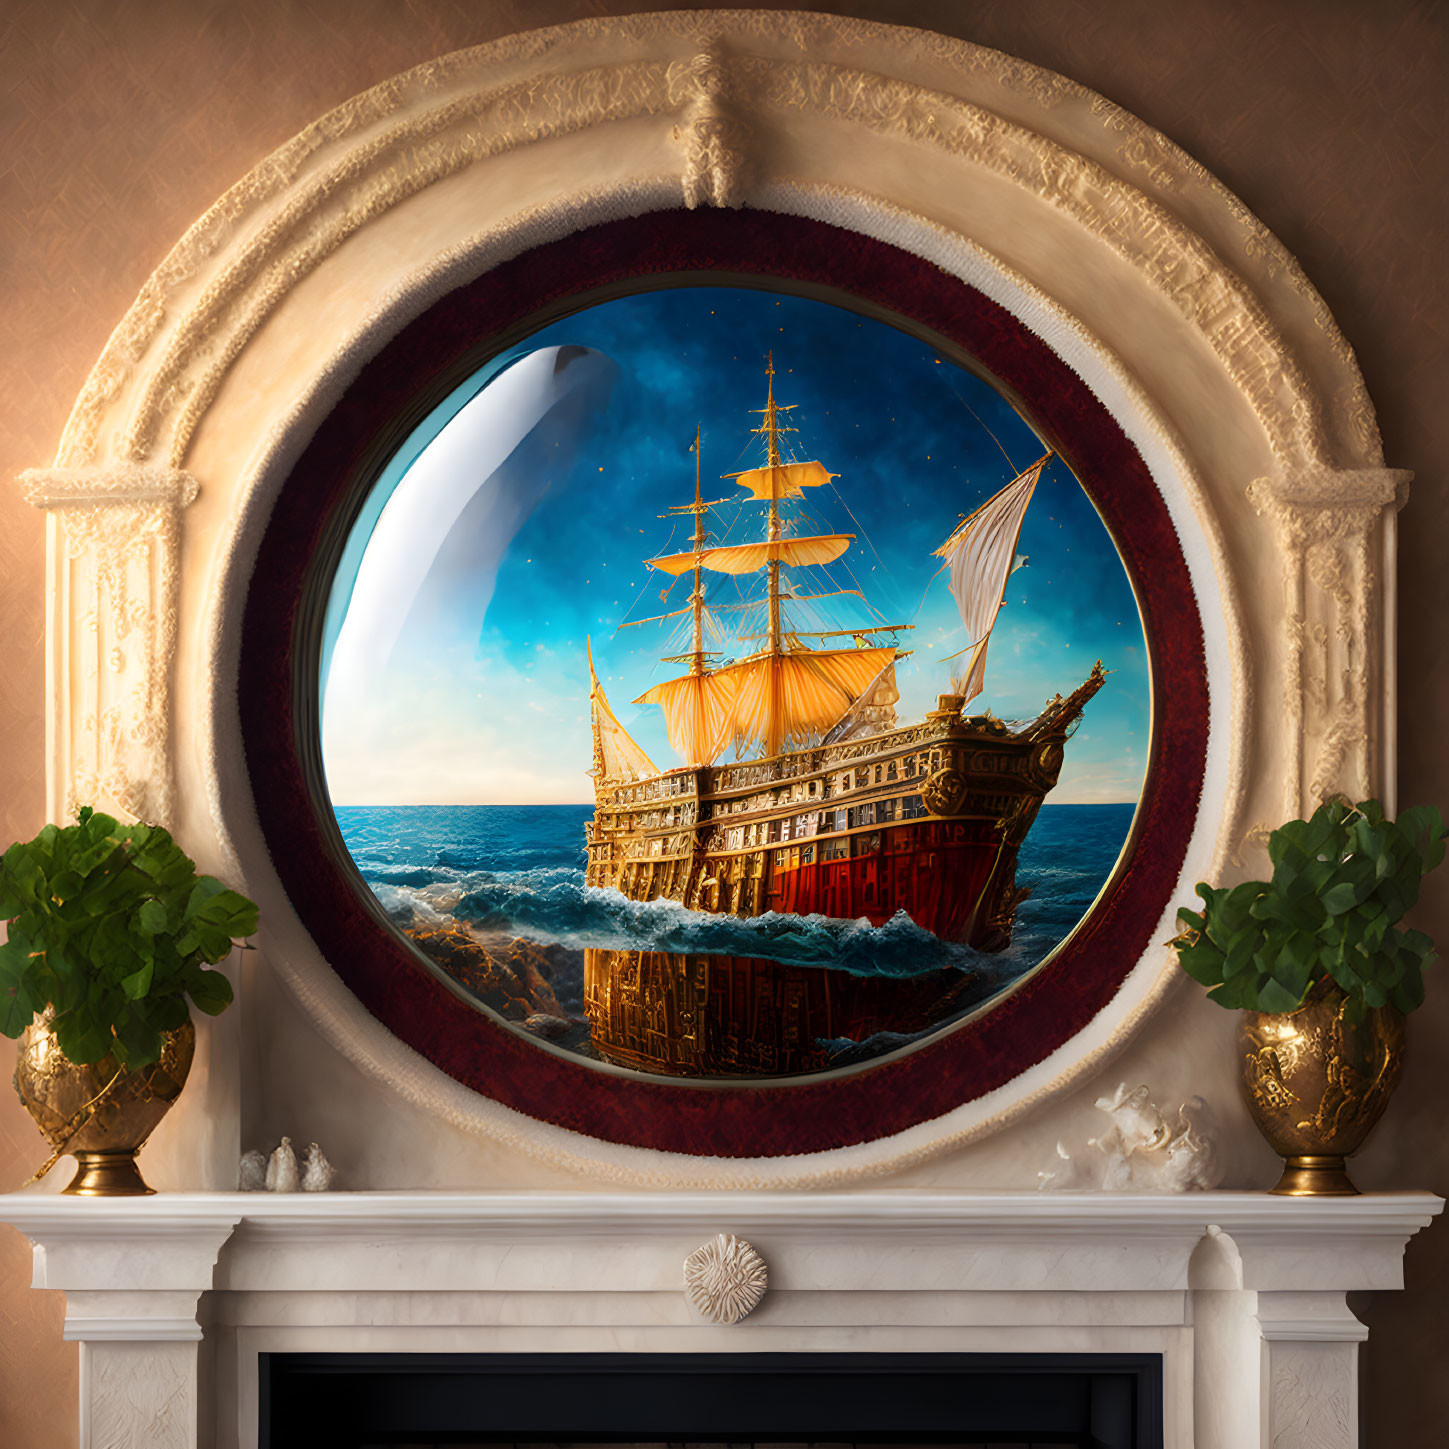 Ship behind glass on a fireplace mantel